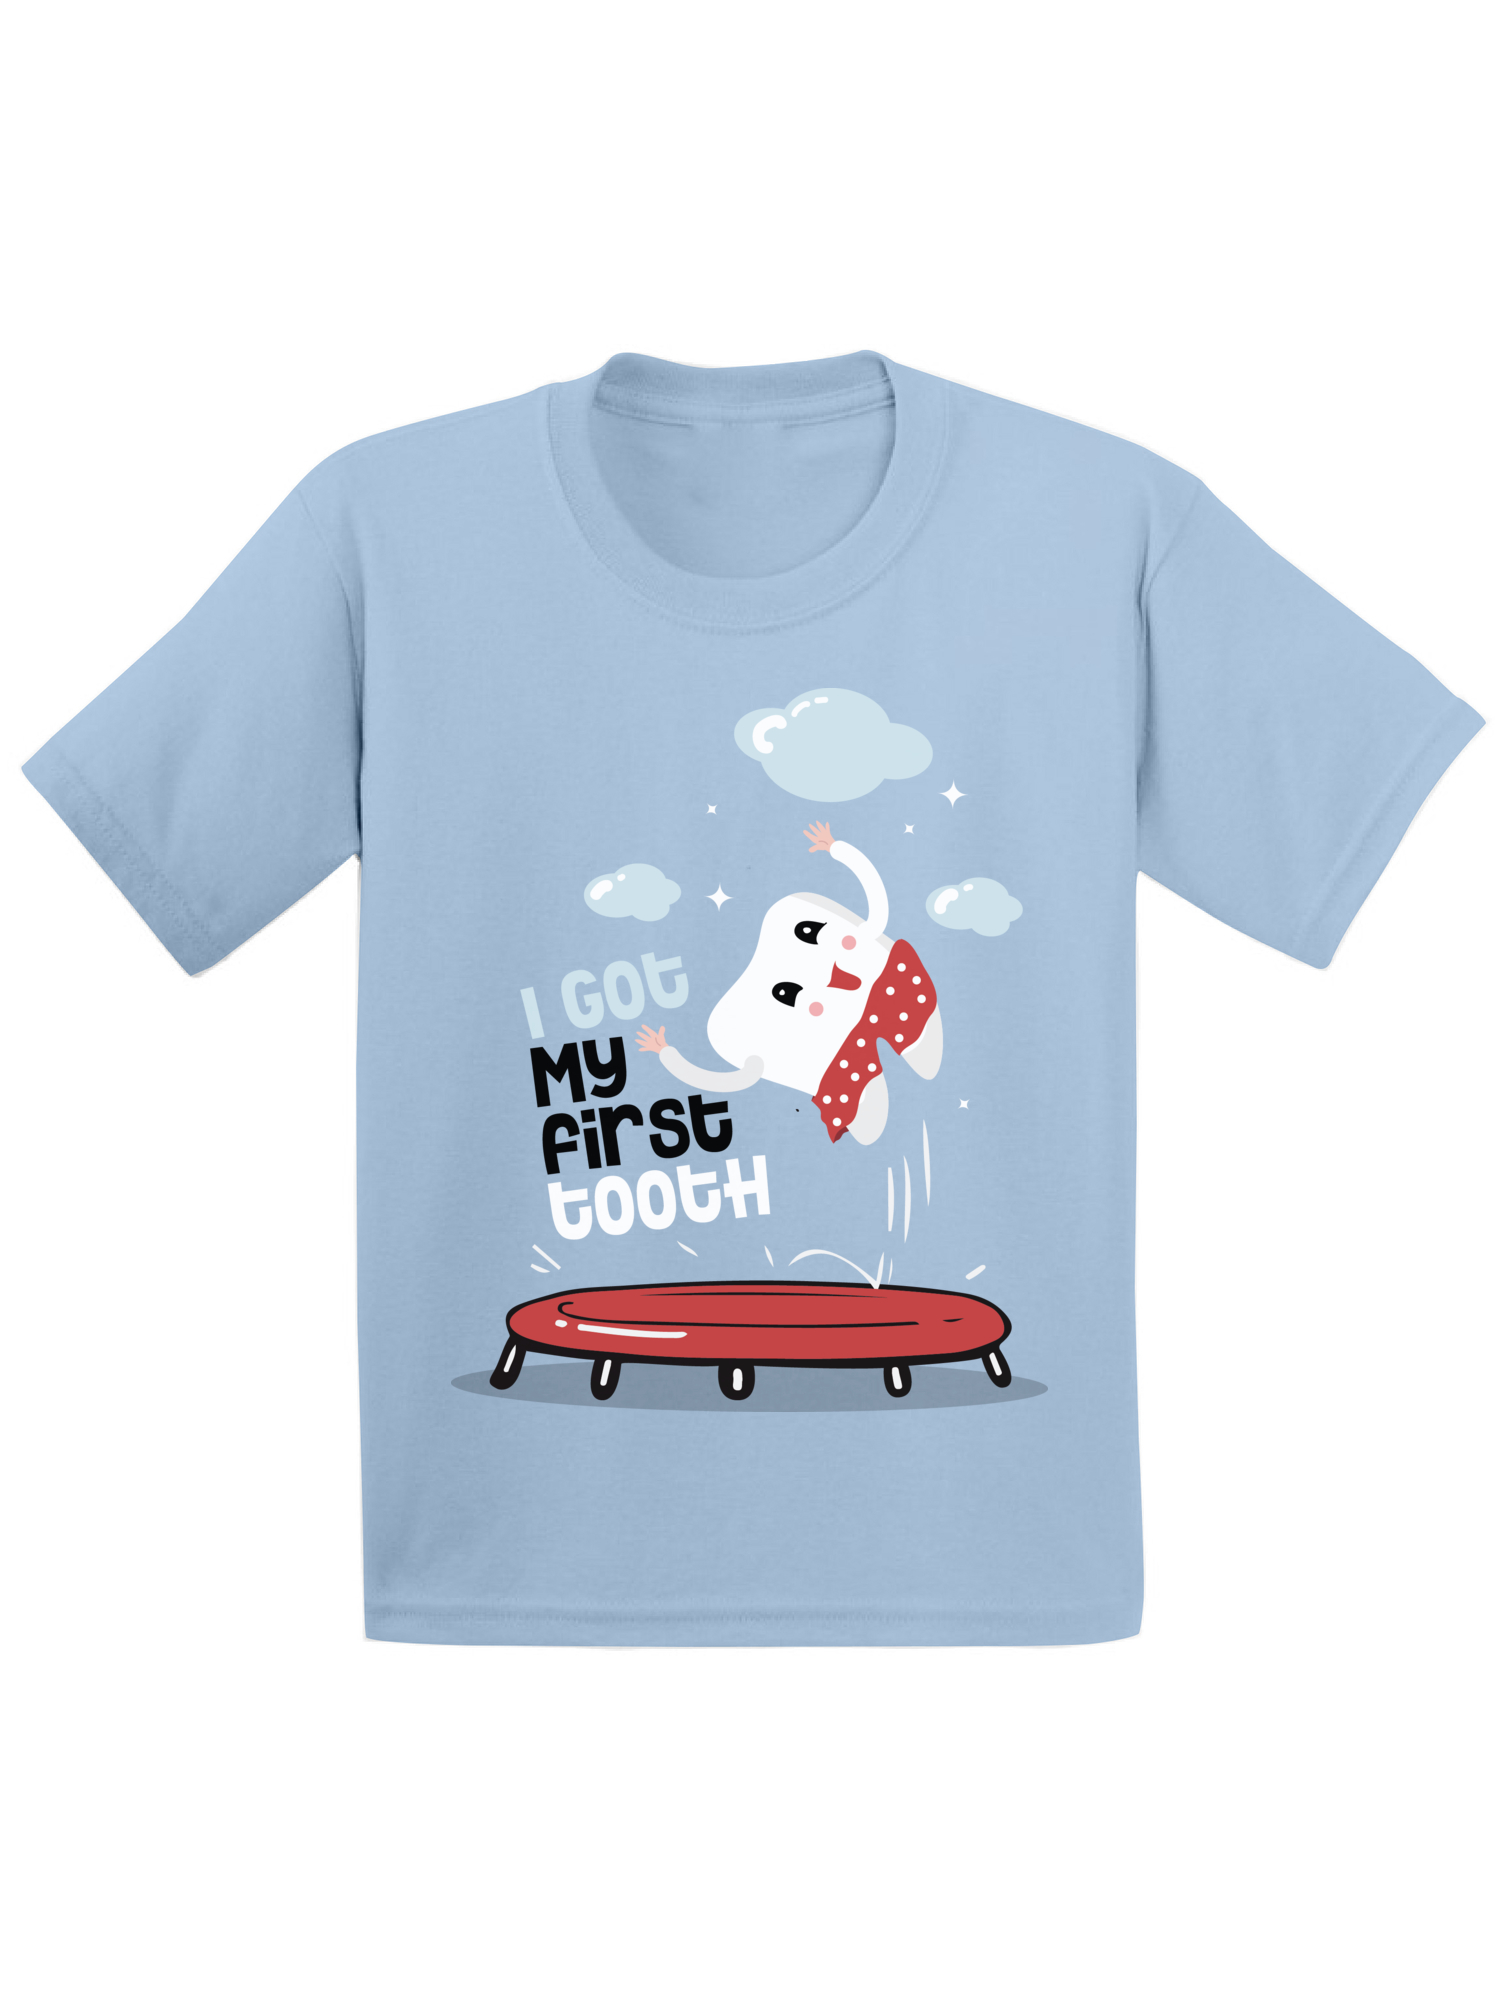 Awkward Styles I Got My First Tooth Infant Shirt Funny Tooth Fairy Gifts Kids First Tooth Party Cute First Tooth Tshirt for Boys Cute First Tooth Tshirt for Girls Themed Party Kids First Tooth - image 1 of 4